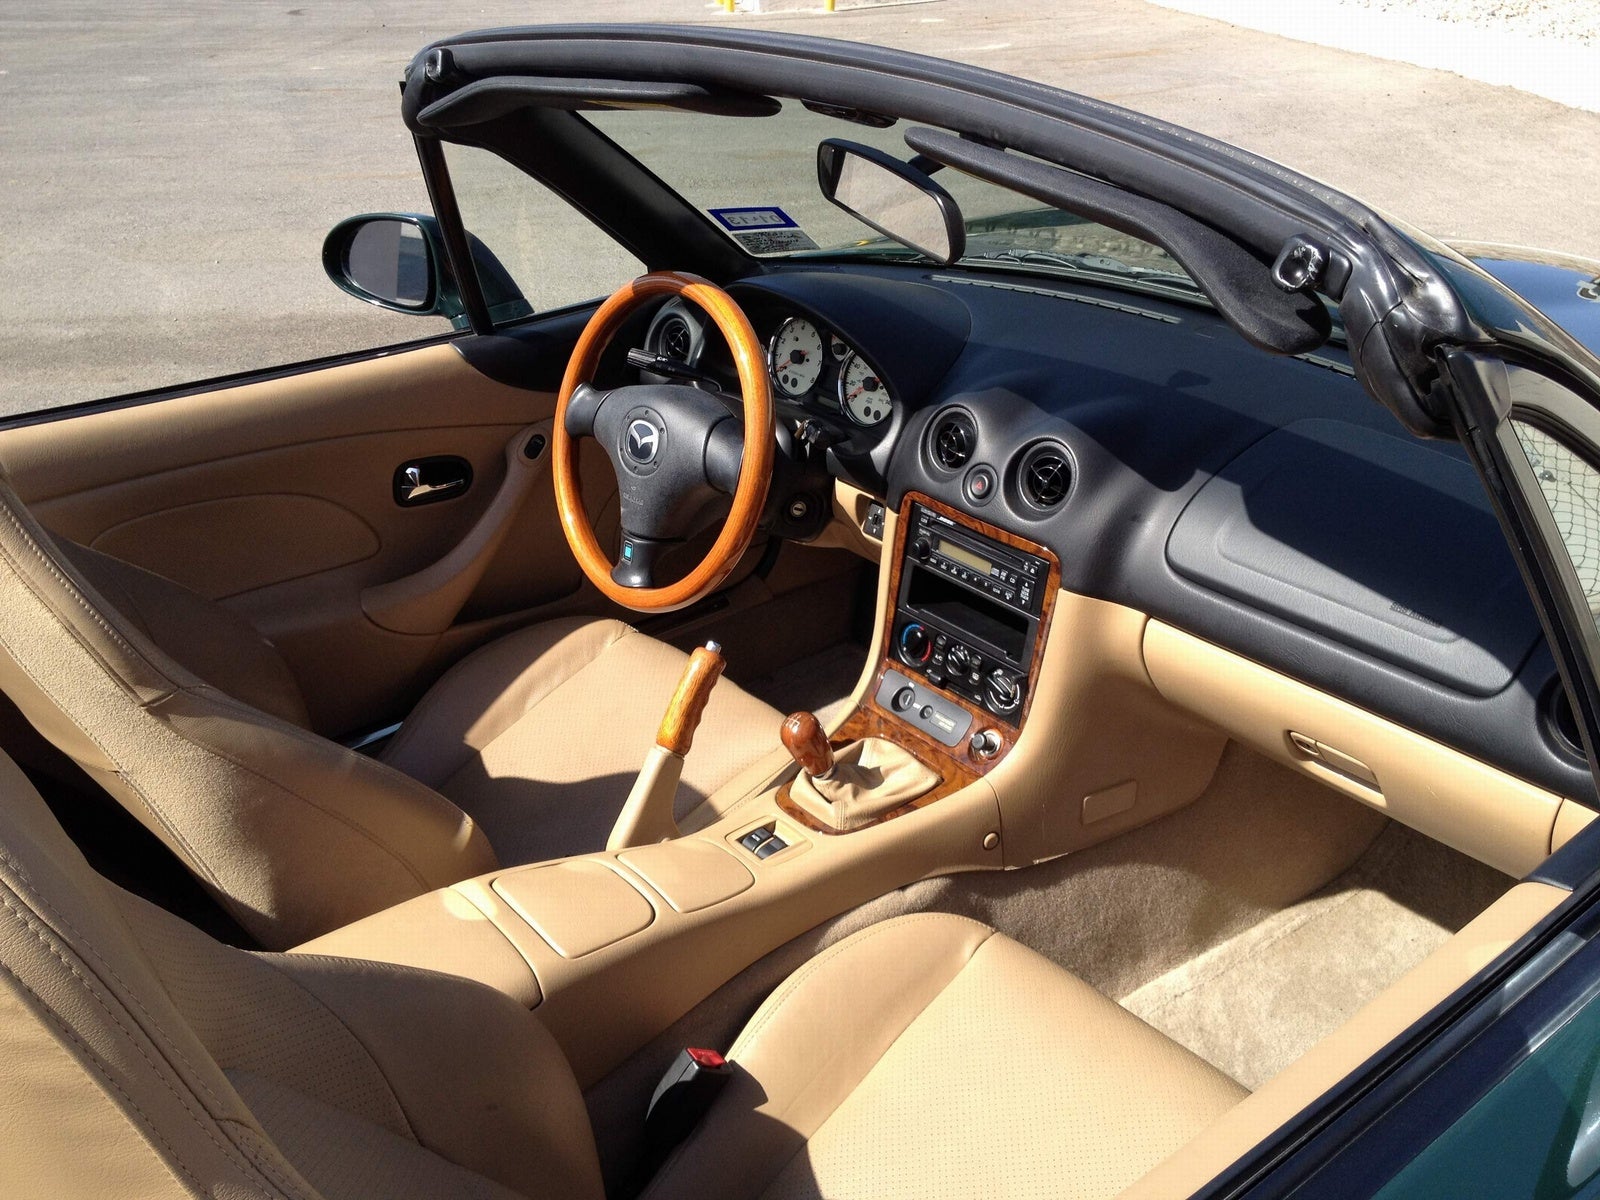 Wich Color For The Interior Would You Like Mx 5 Miata Forum